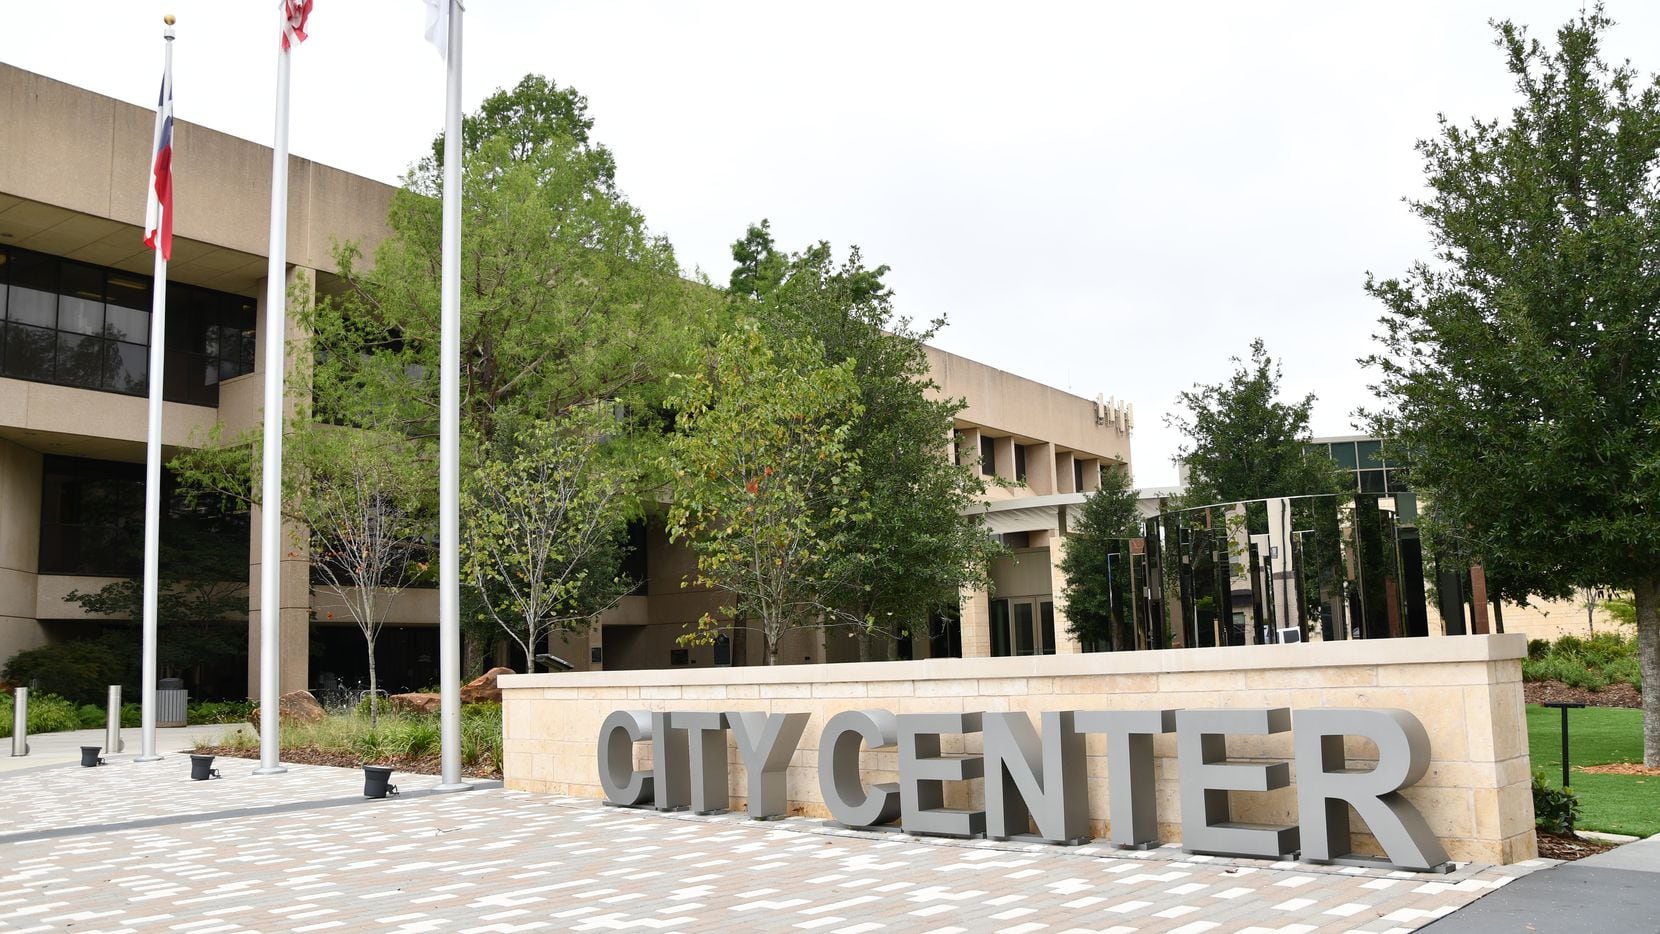 Arlington City Center in this file photo.